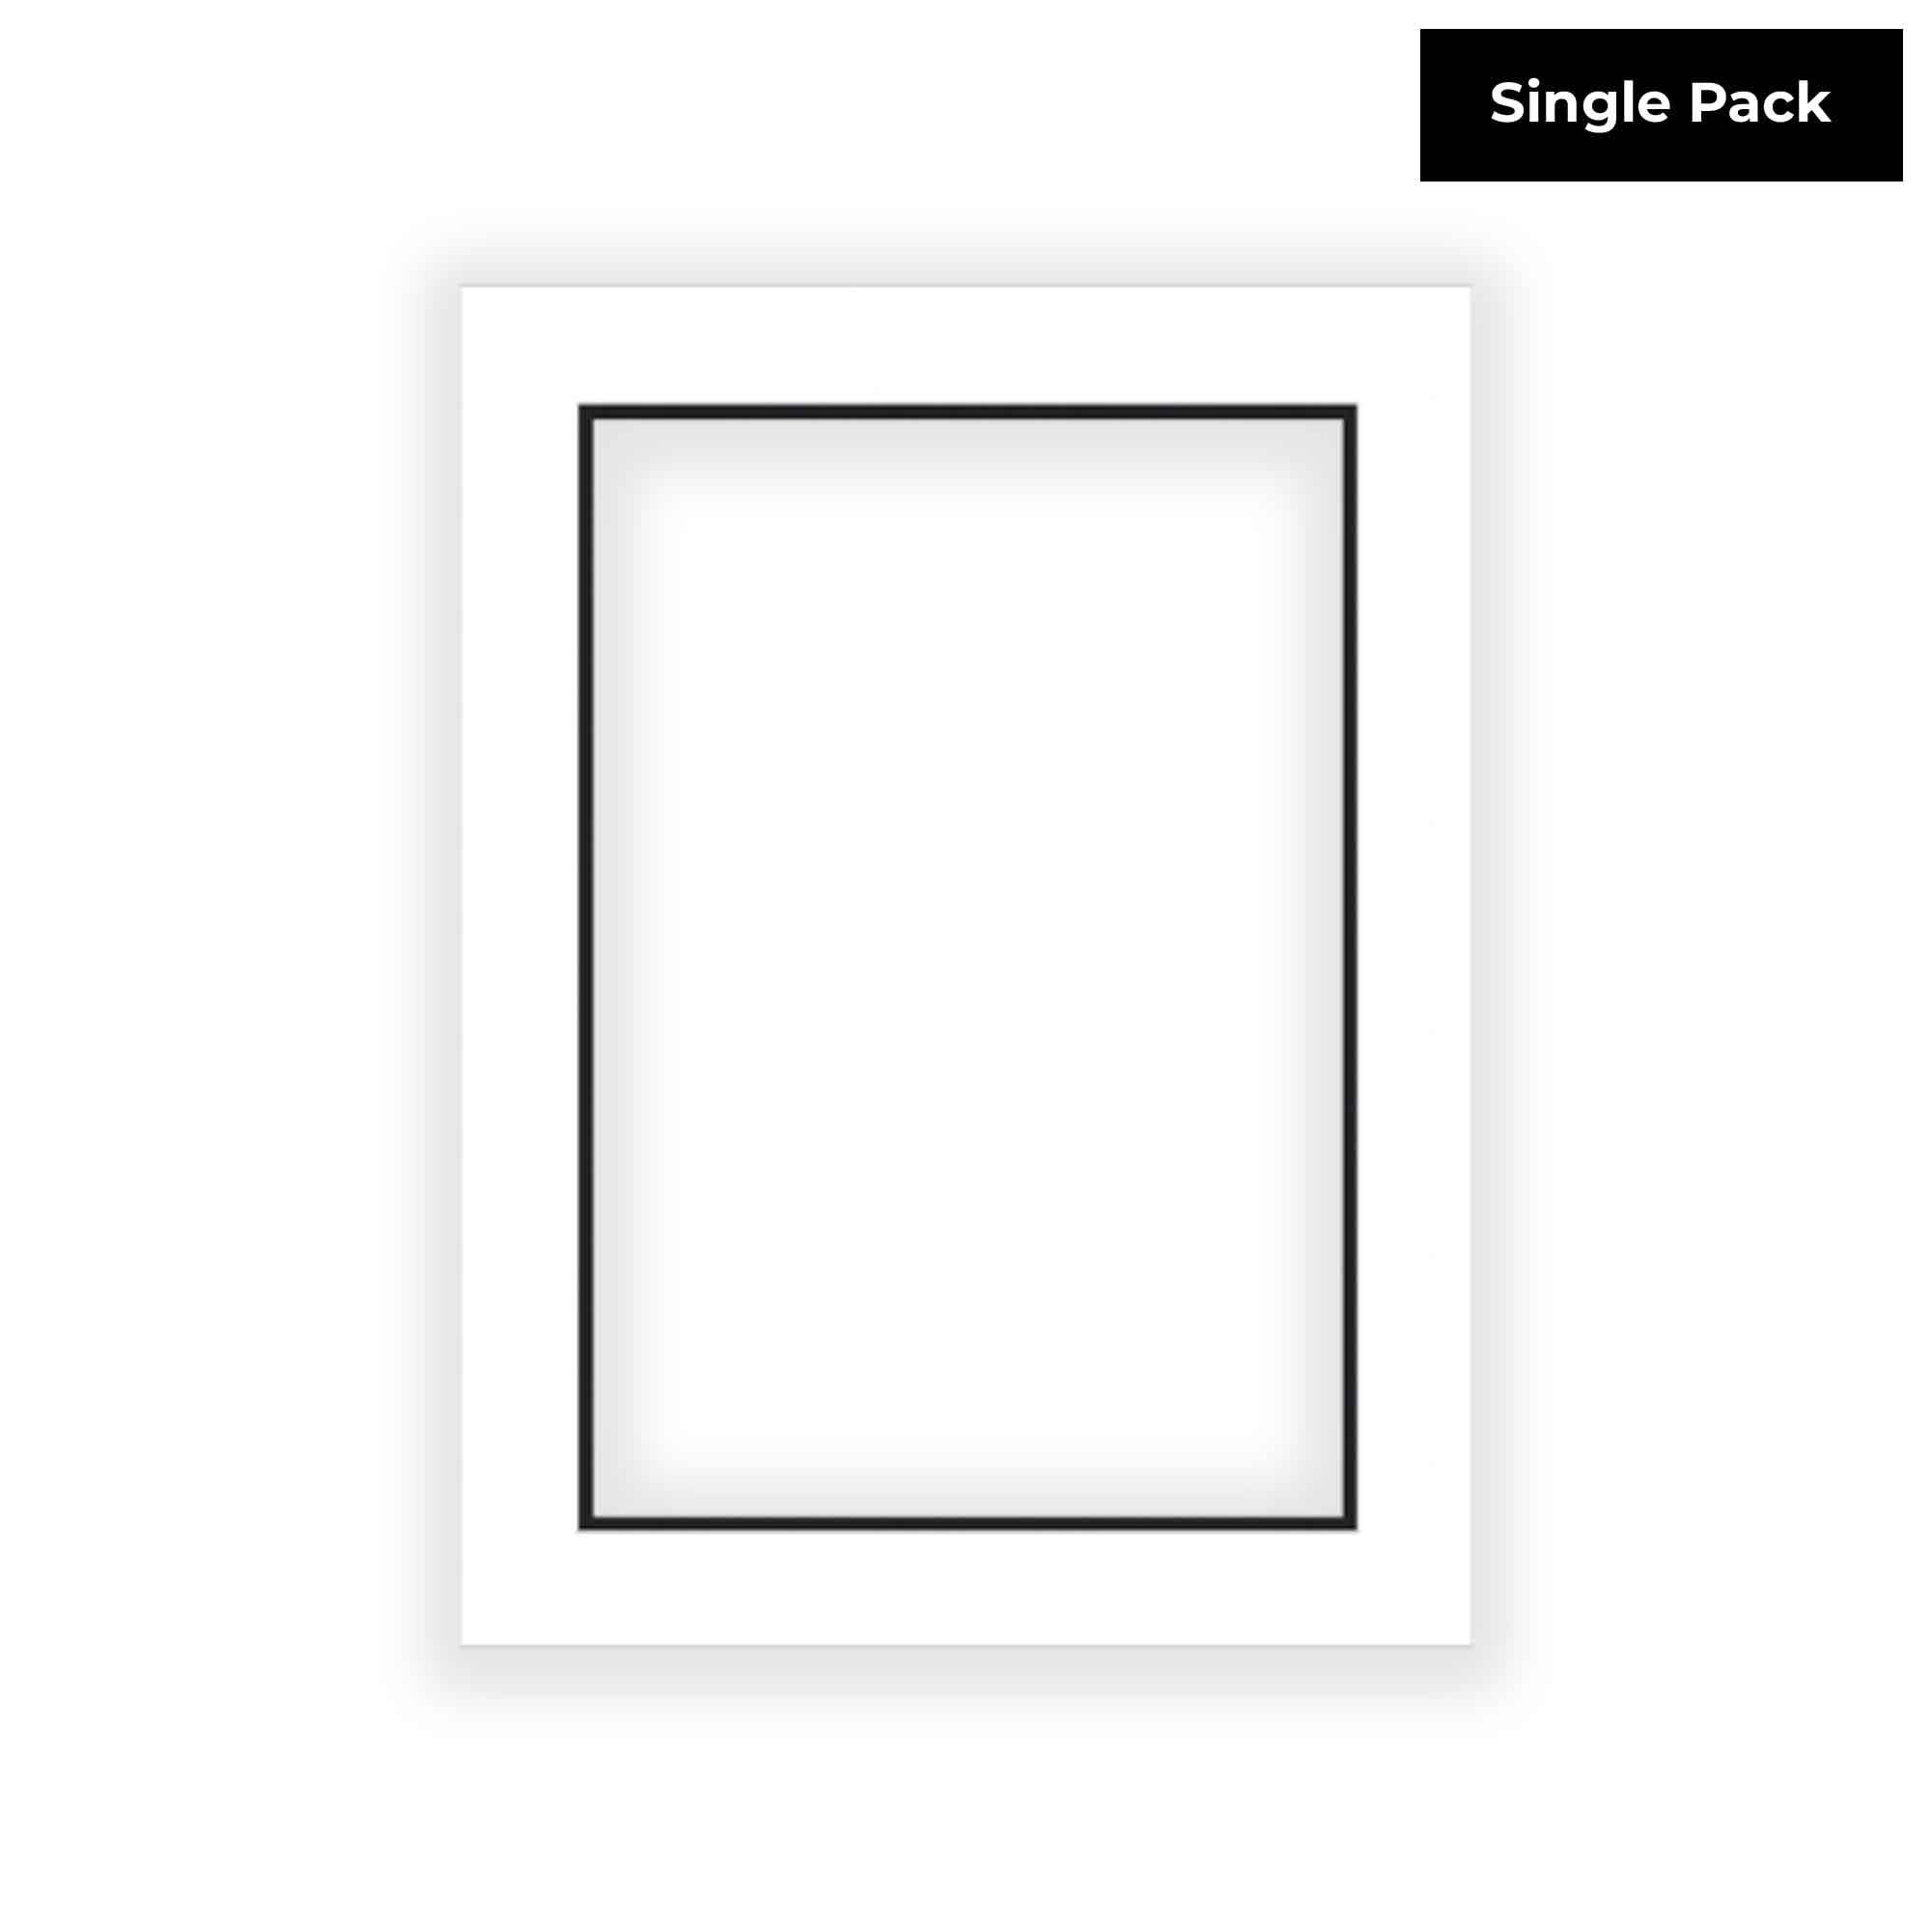 5 Pack Pictures Black Over Black 11x14 Double Mats for 8x10 Frames Golden State Art for Photos Acid-Free 